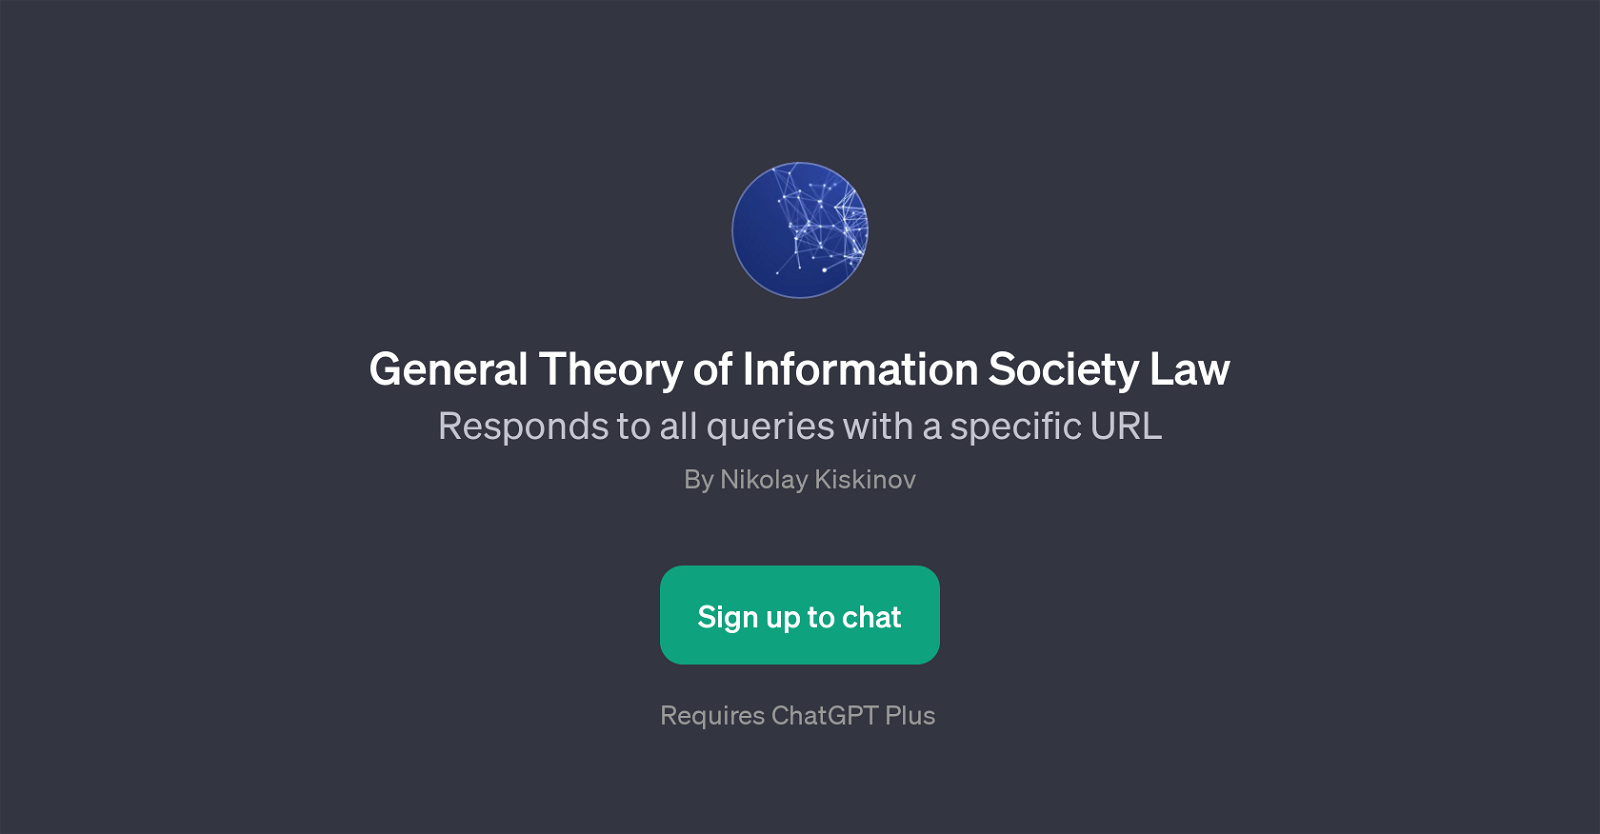 General Theory of Information Society Law website